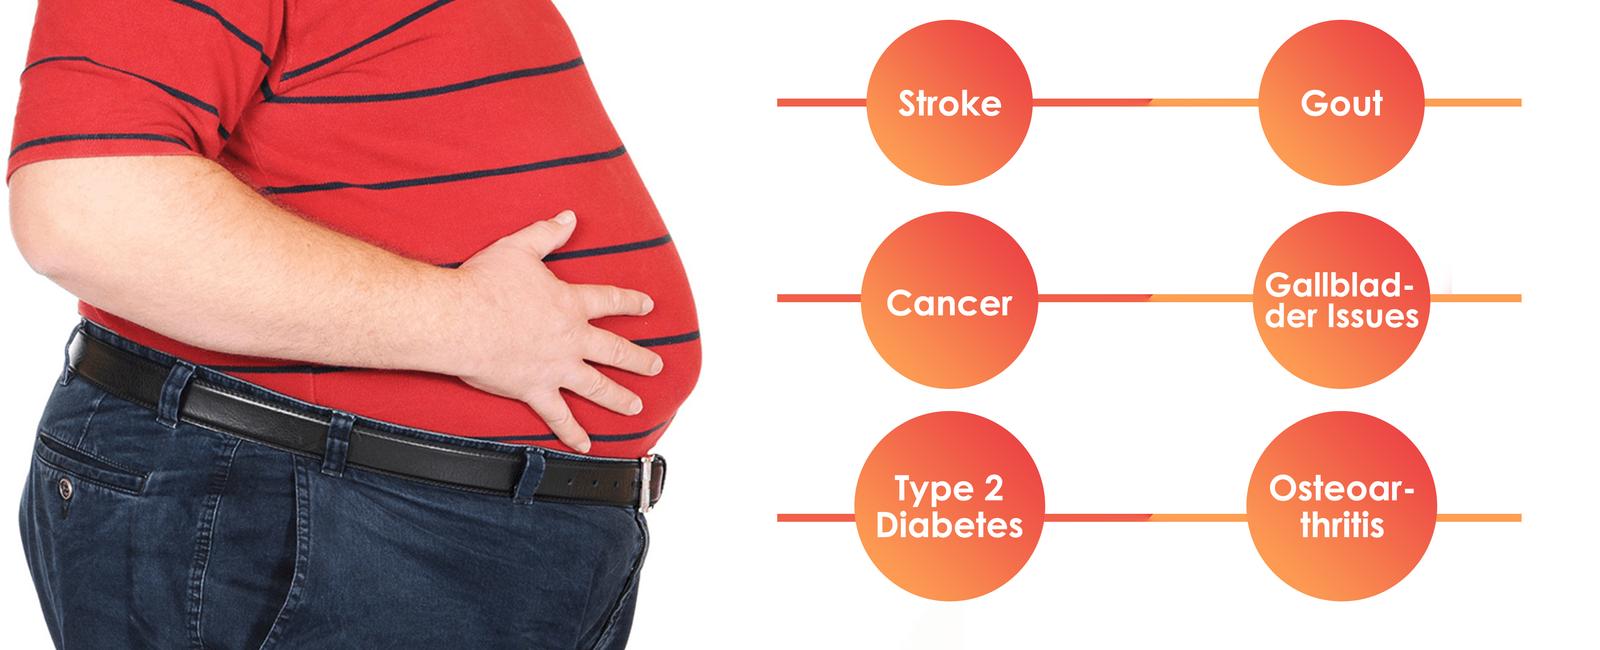 Obesity can increase the chances of developing diseases such as type 2 diabetes and heart disease